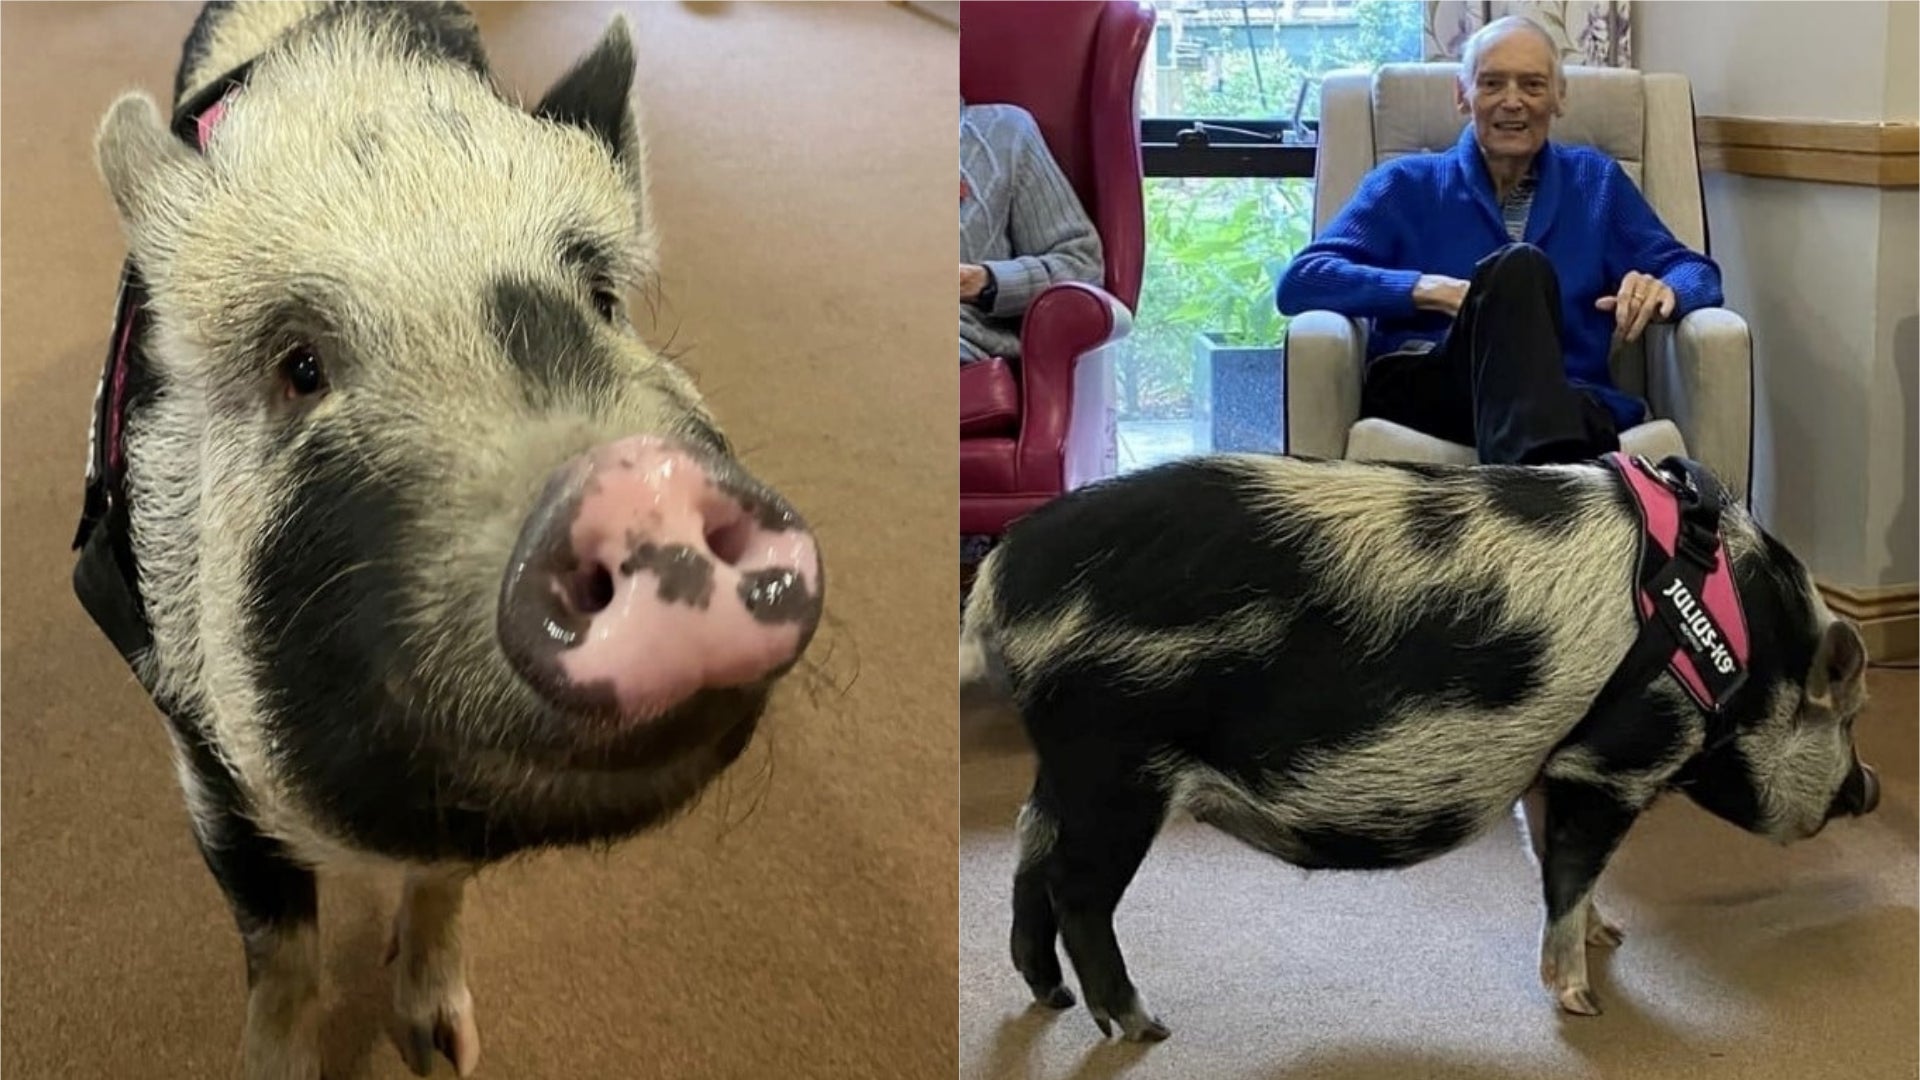 Pet pig hogs the attention on visit to owner’s care home